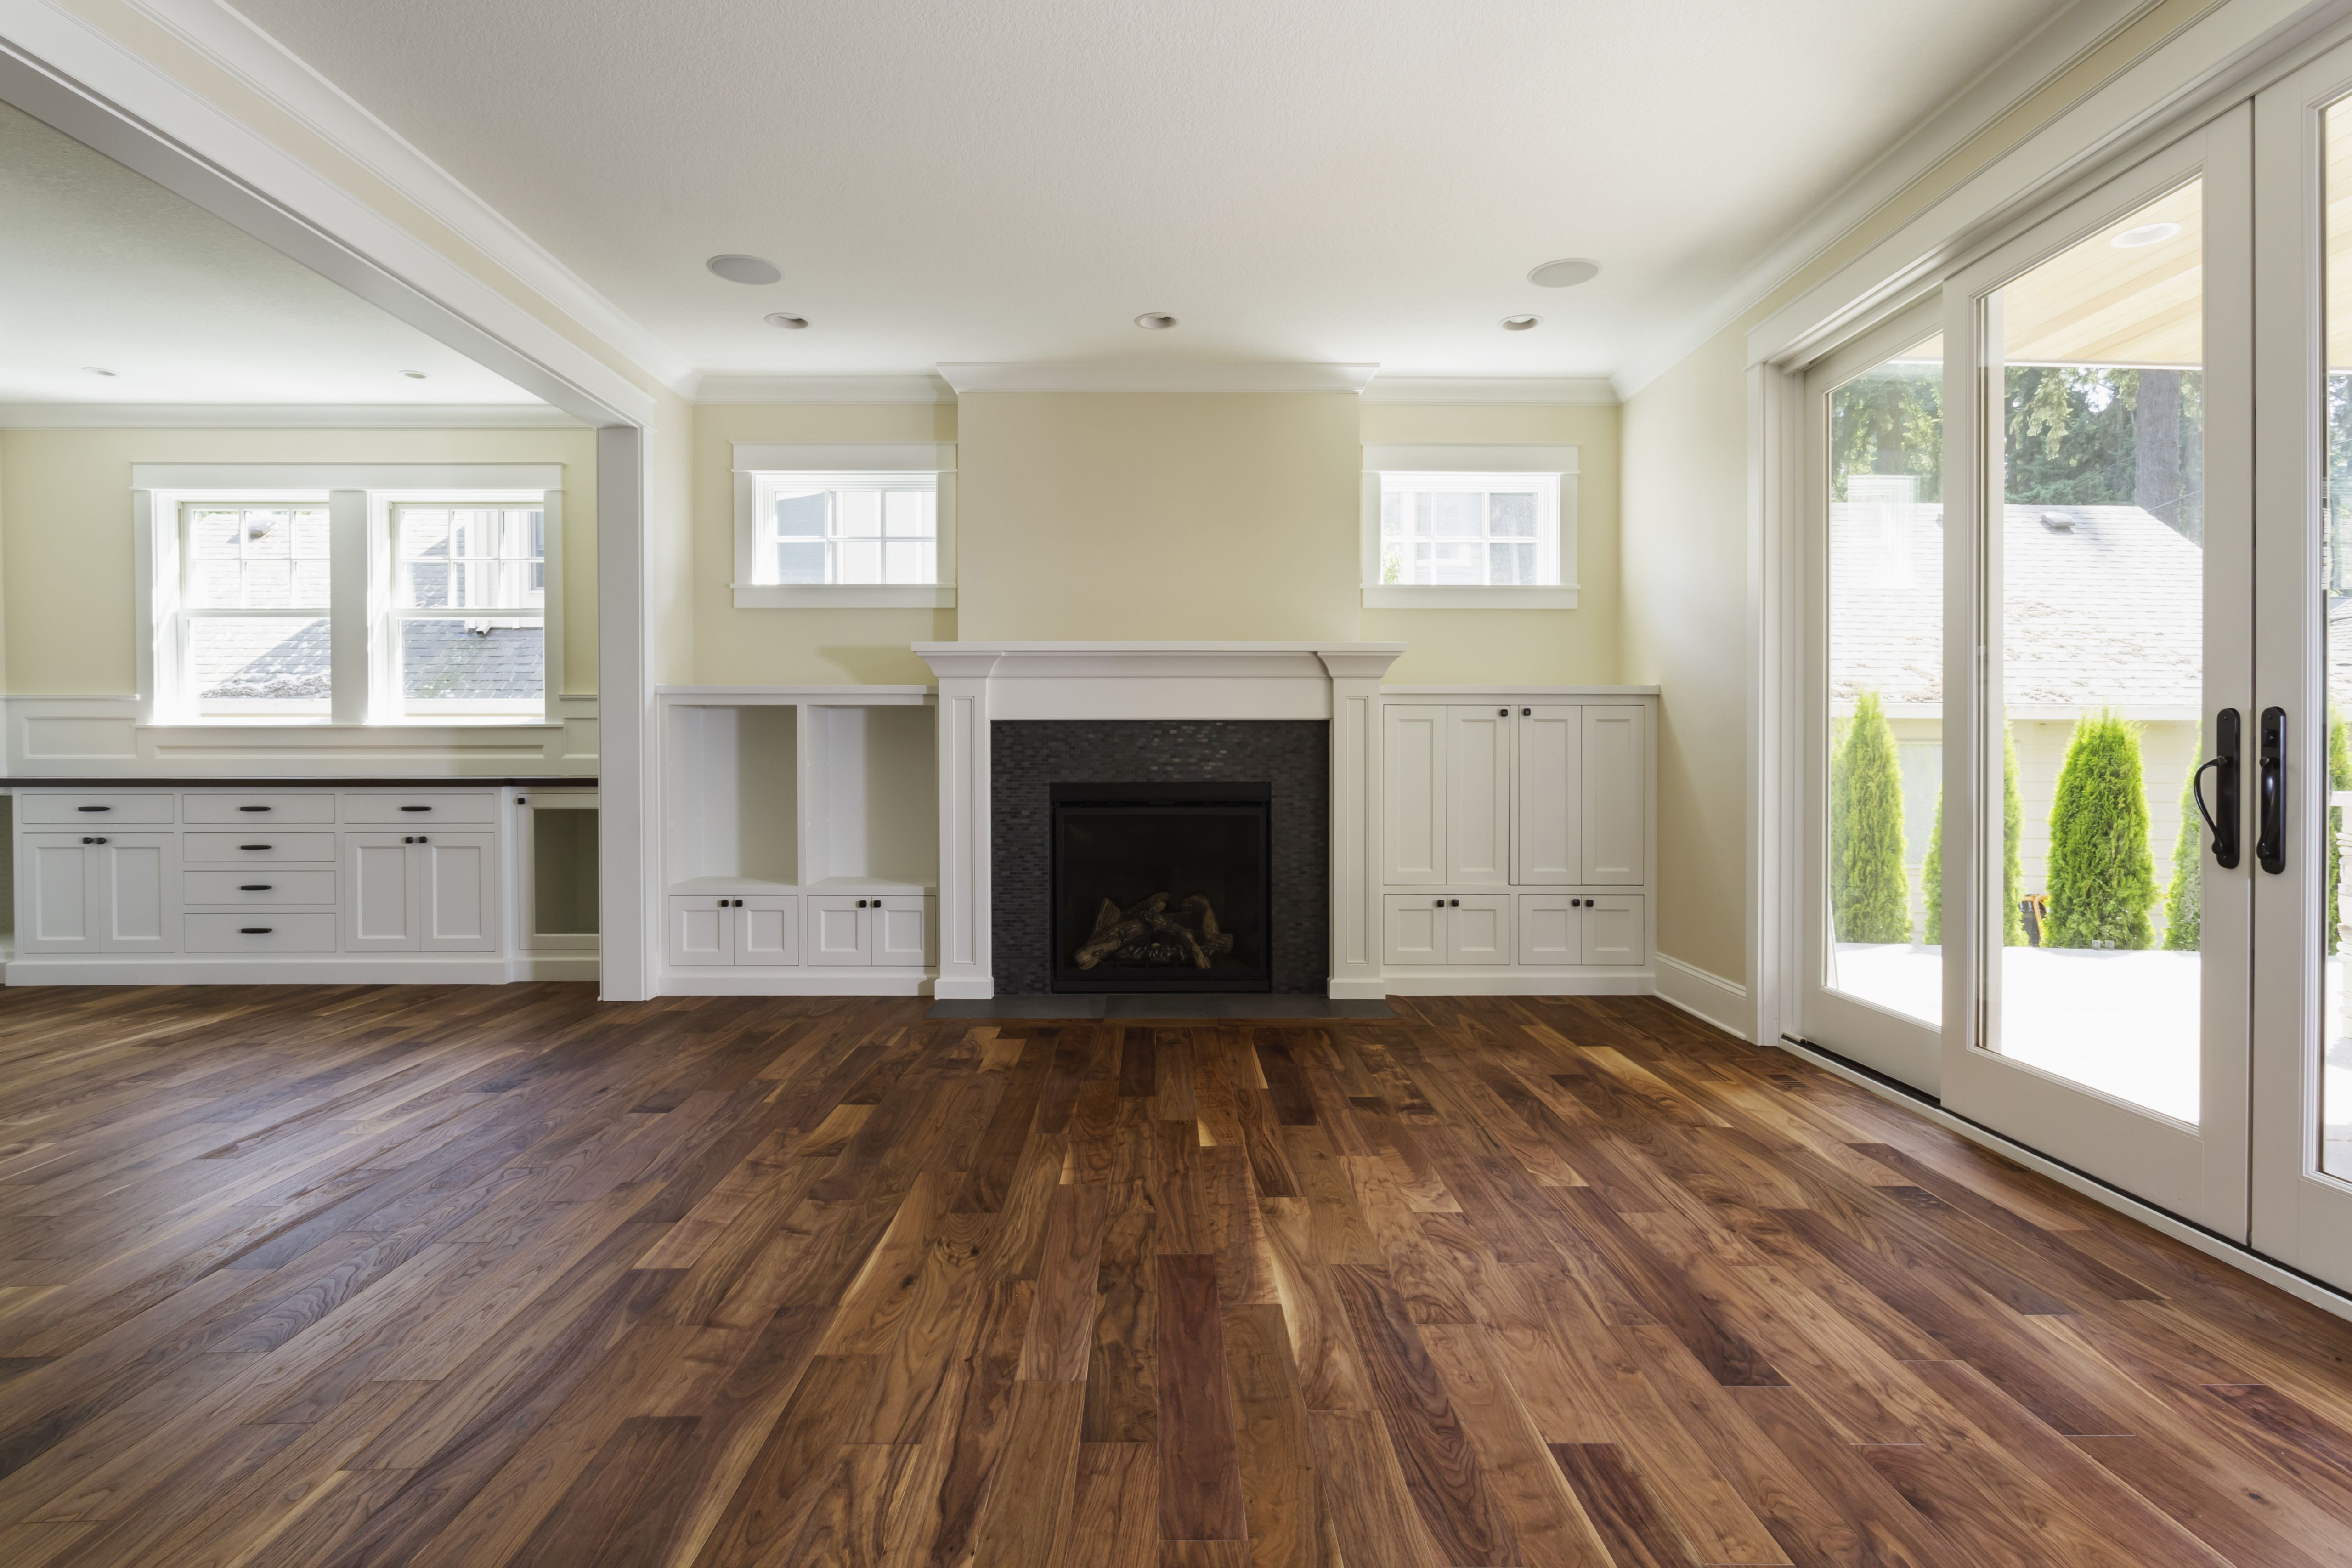 29 Stylish Canadian Birch Hardwood Flooring 2024 free download canadian birch hardwood flooring of the pros and cons of prefinished hardwood flooring in fireplace and built in shelves in living room 482143011 57bef8e33df78cc16e035397